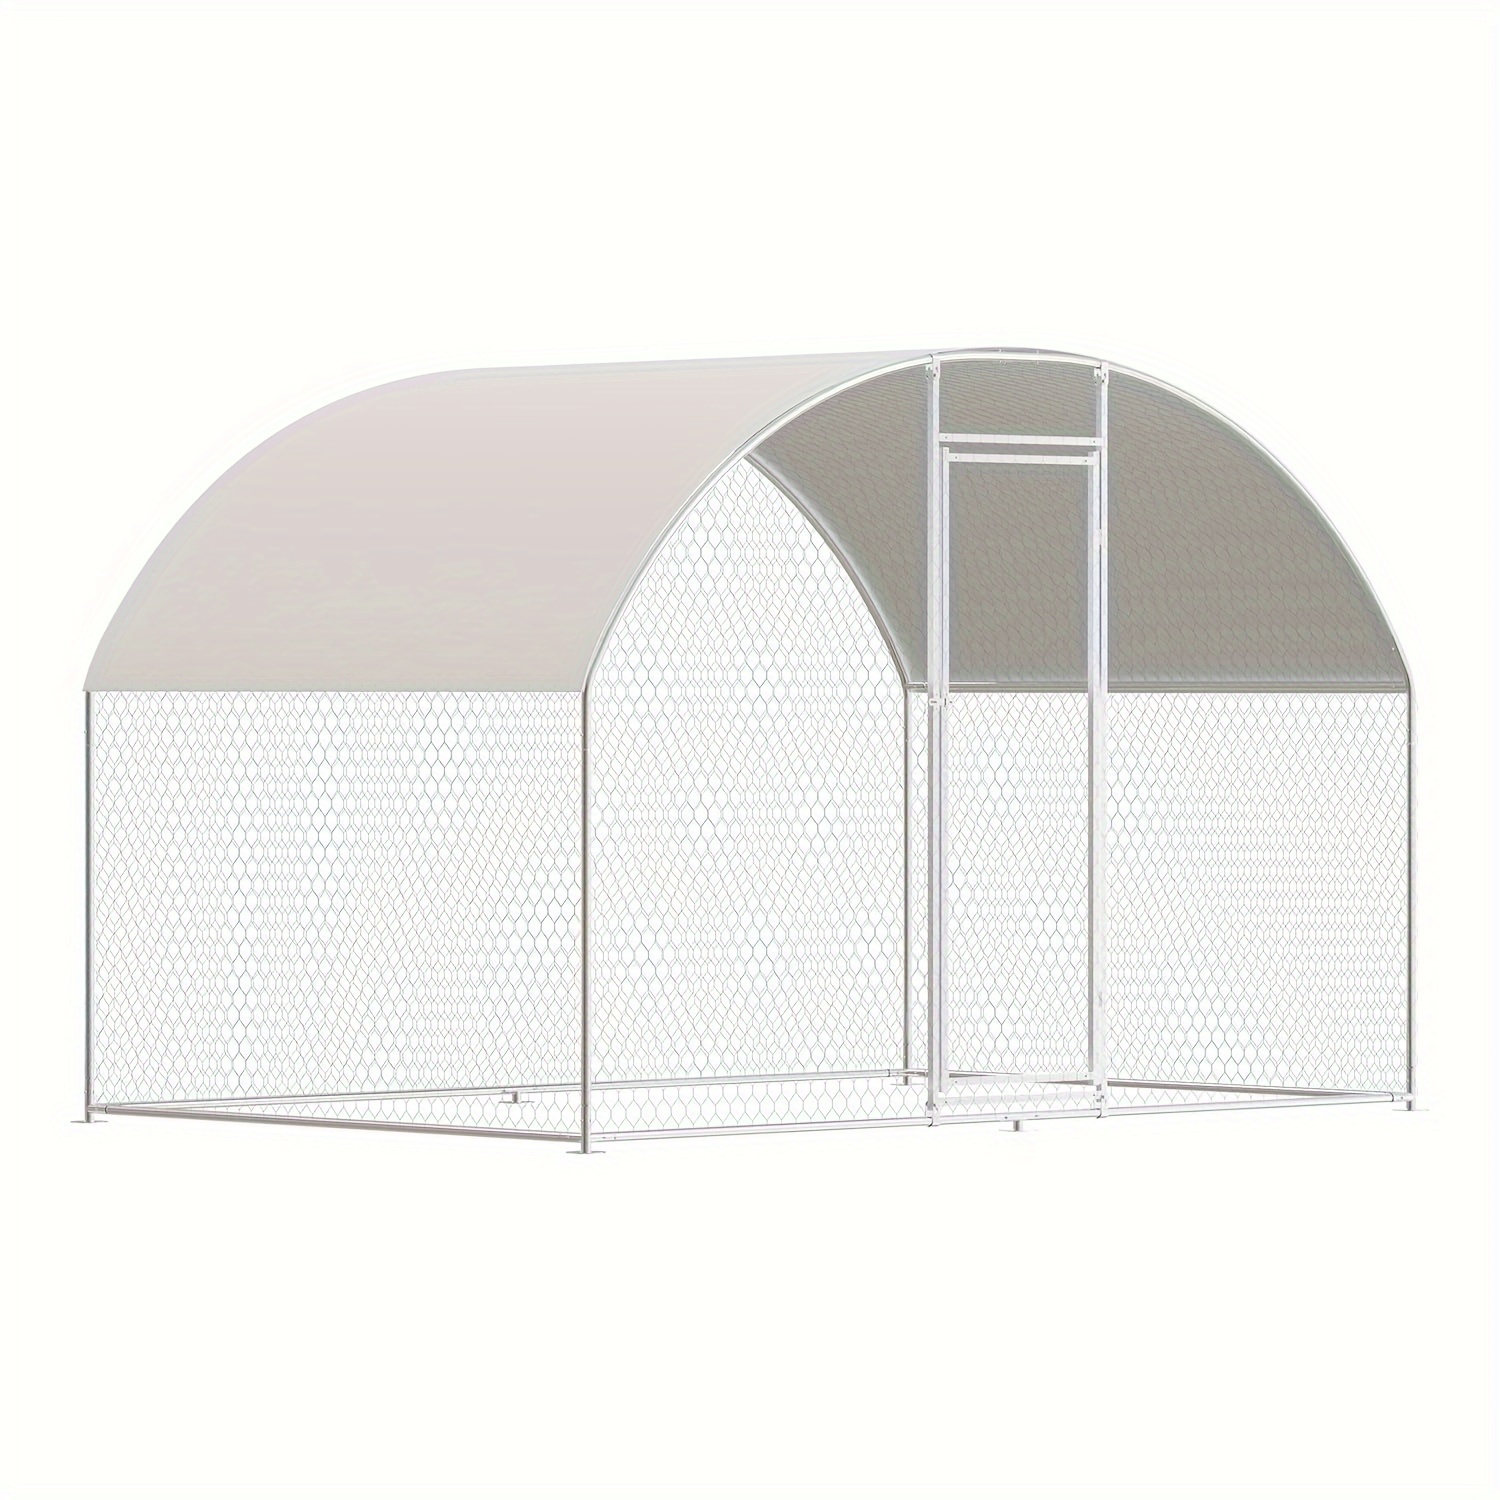 

Large Metal Chicken Coops For 10/6 Chickens Coop Walk-in Poultry Cage Chicken Runs For Yard With Cover Waterproof And Anti-uv Chicken Pens Outdoor With Top Silver (6.6' L× 9.8'w × 6.6'h)